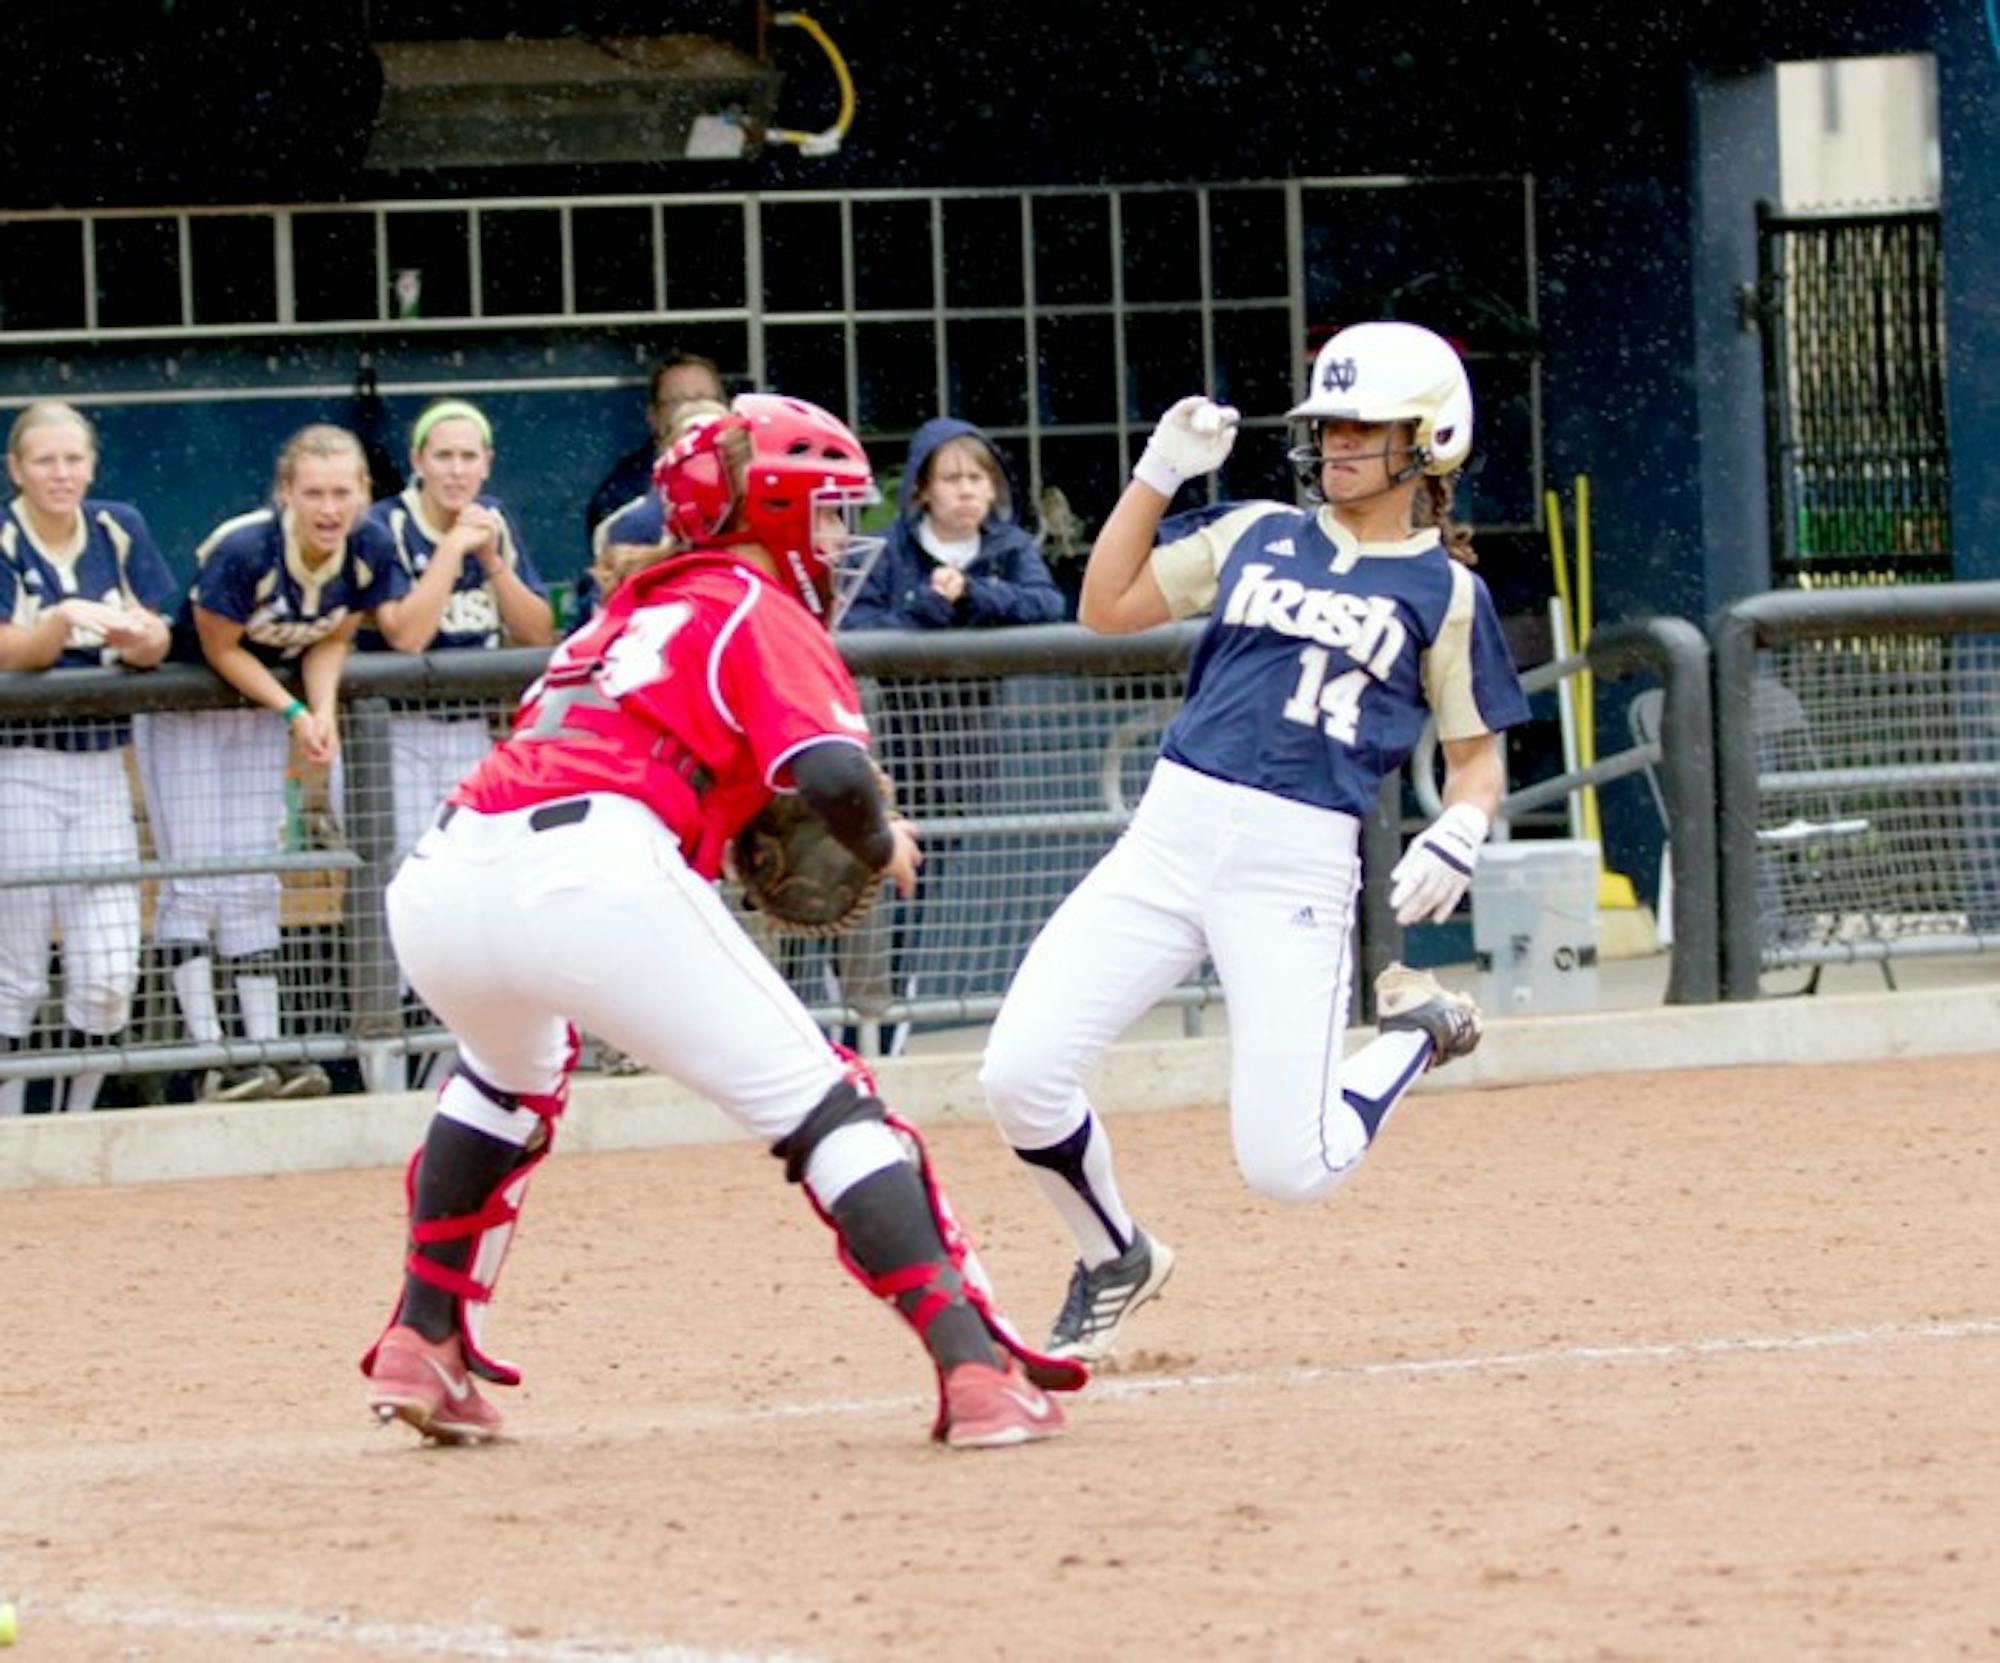 Irish senior outfielder Monica Torres prepares to collide with the catcher at home plate durng an exhibition against Illinois State on Sept. 5, 2013.